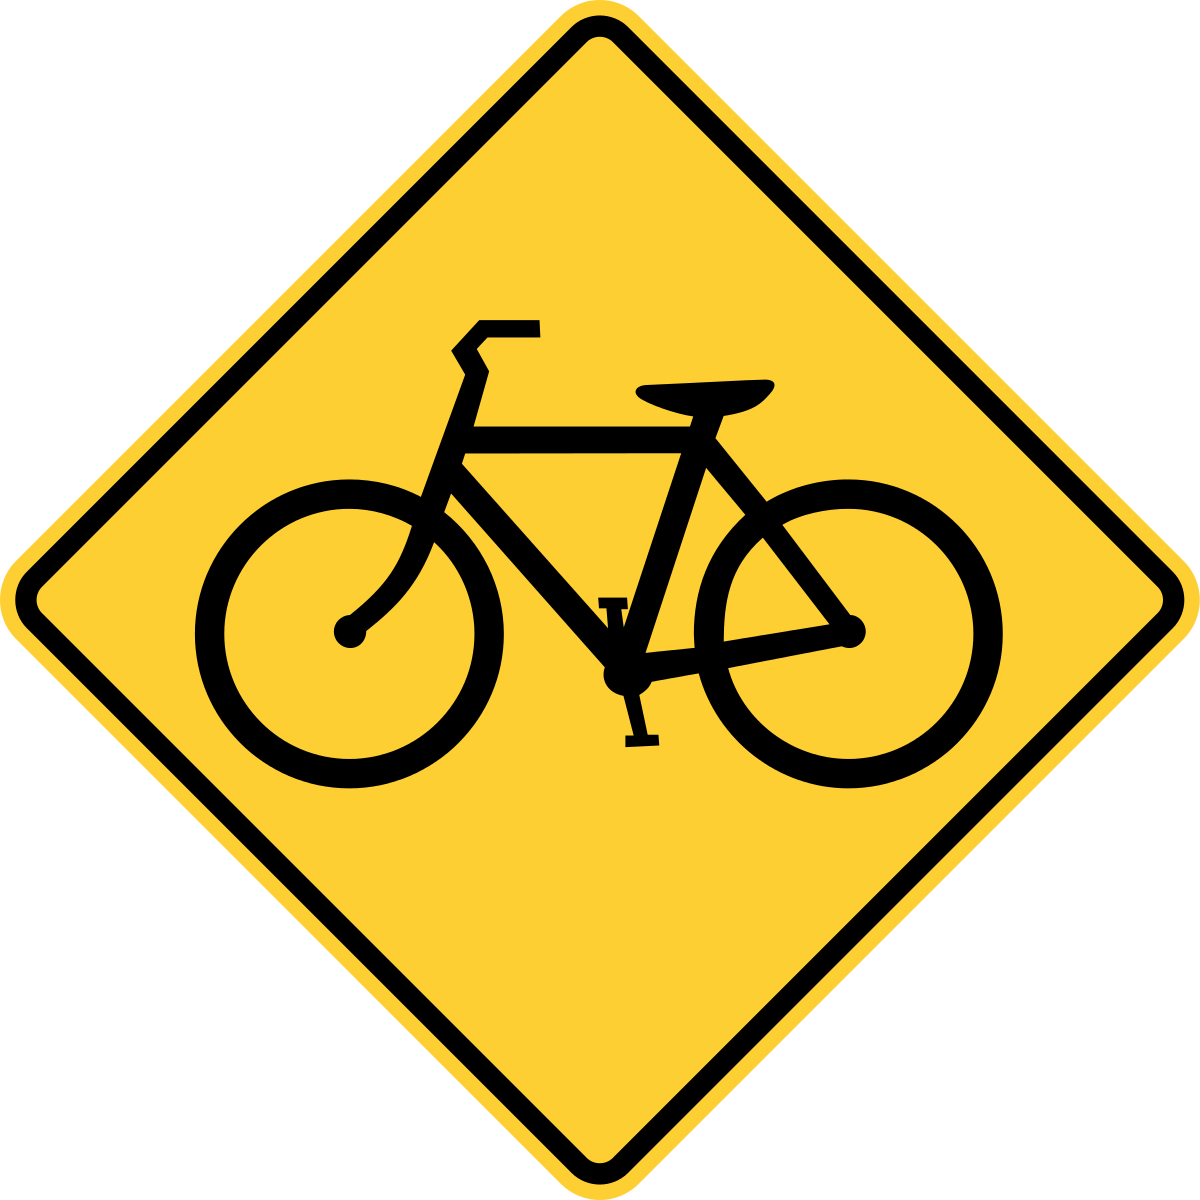 A Yellow Road Sign With A Bicycle